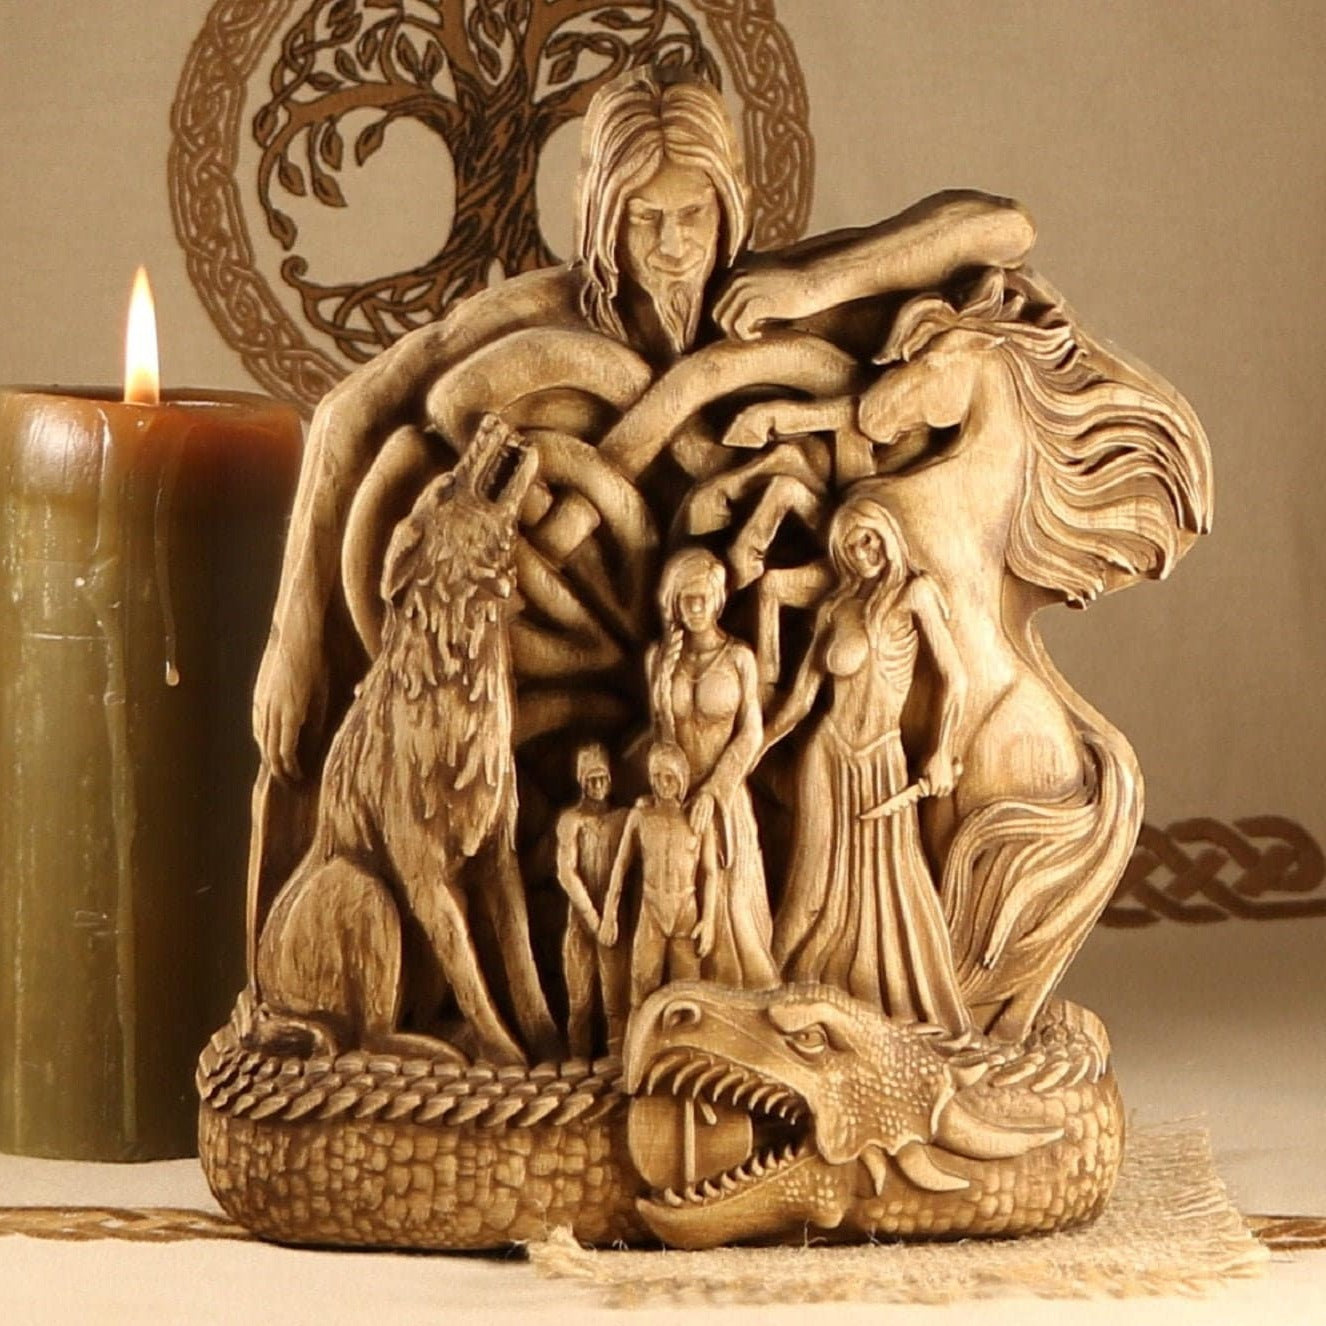 Lokі’s Family Statue, Norse God Wood Carving Sculpture